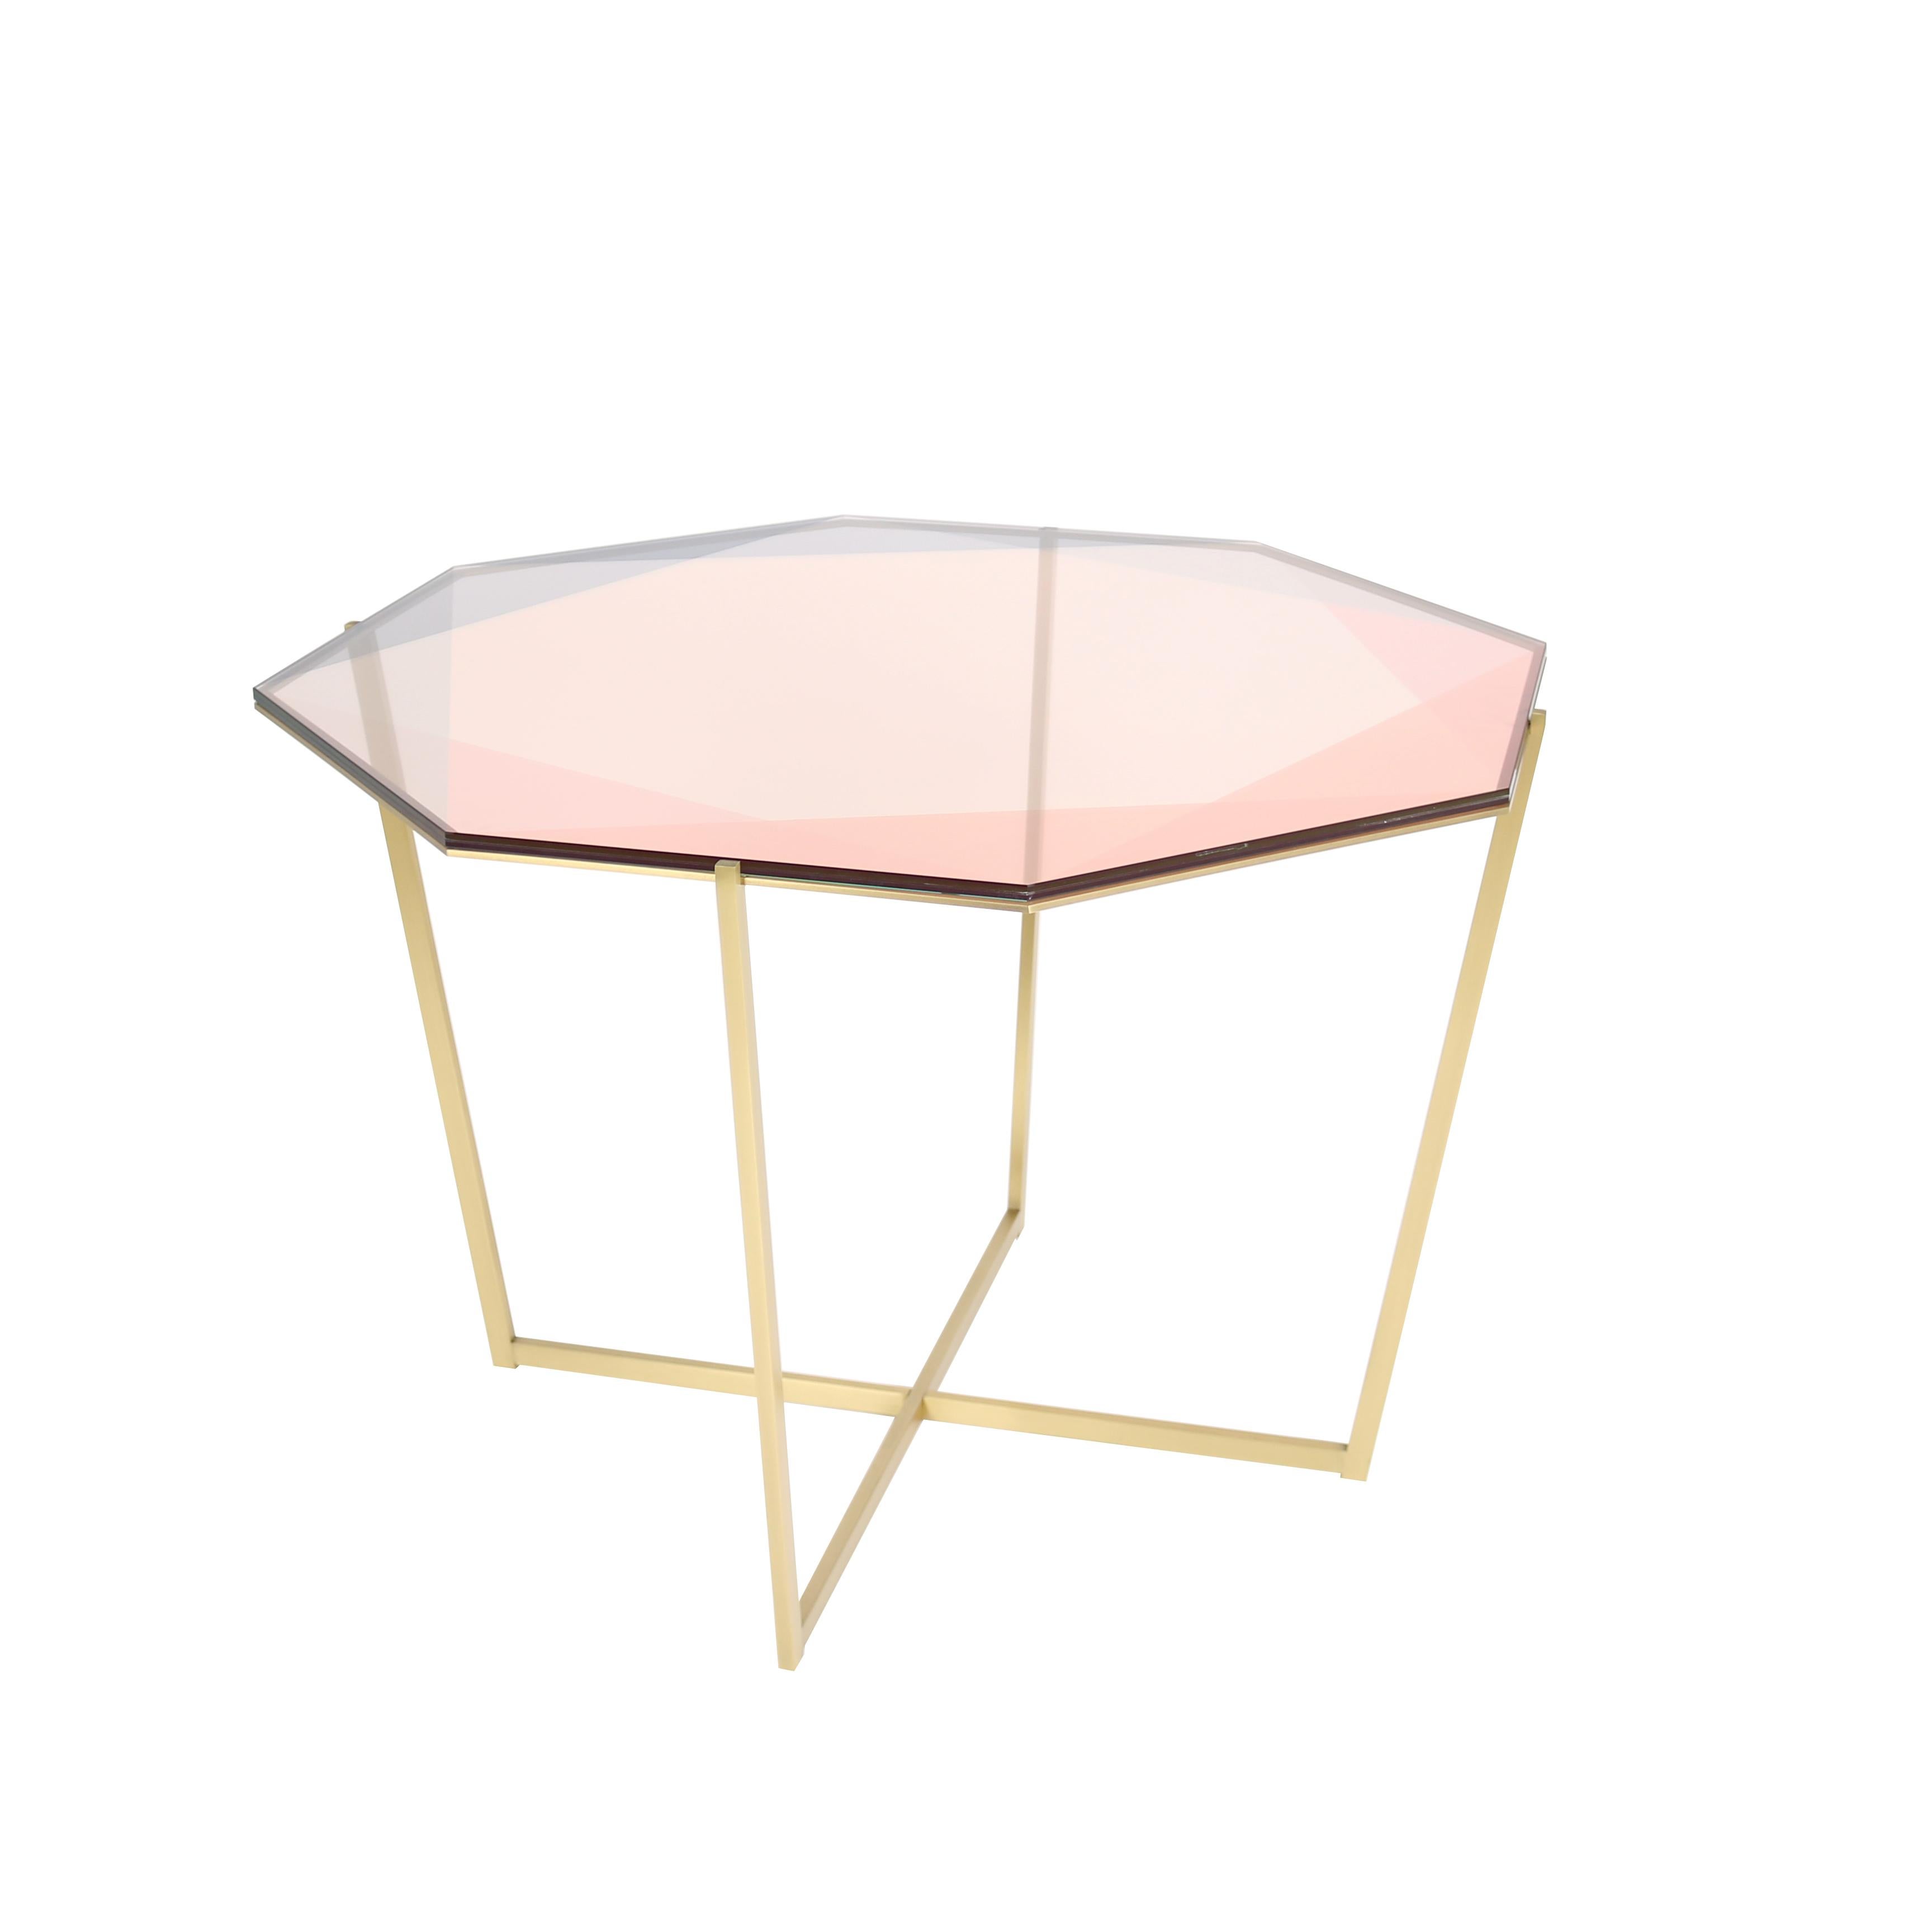 Our Gem collection of tables are inspired by the reflections of light and transparencies found in gemstones. These metal and glass tables translate facets through layers of color and varying opacity. Each table base is designed as a setting with